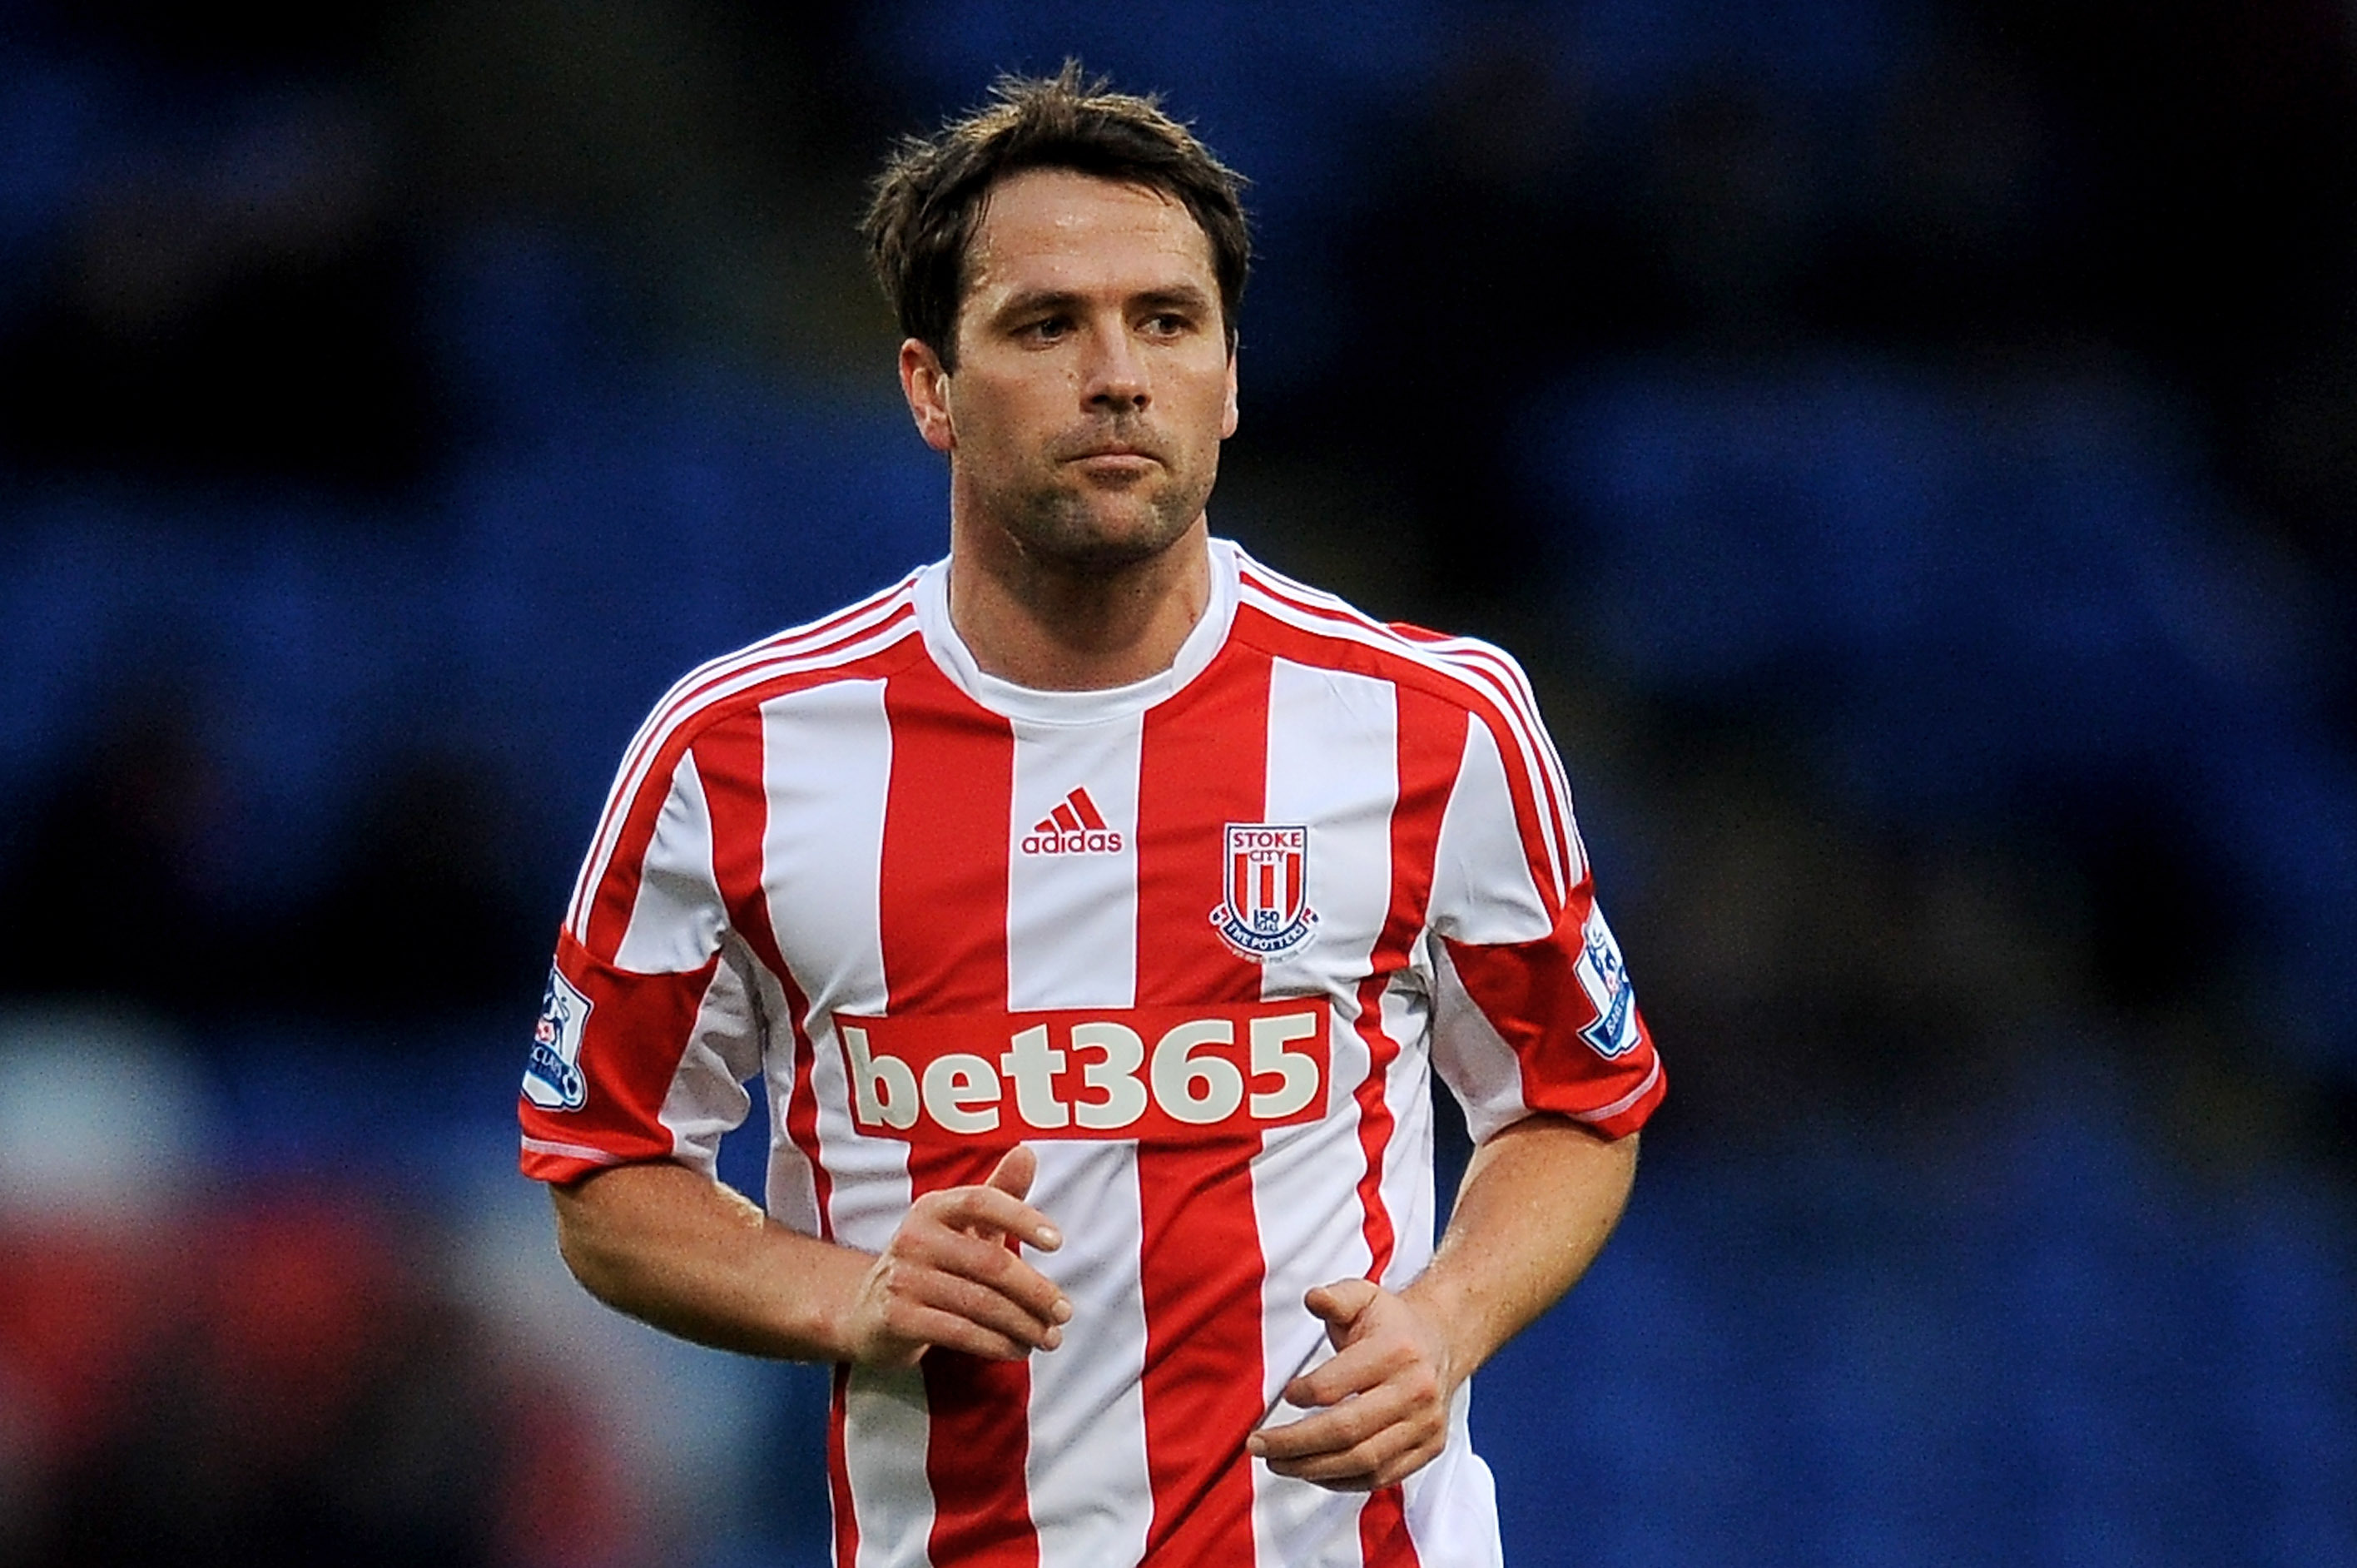 Stoke City: Michael Owen Forced to Apologize to Bradford City After Twitter Gag | Bleacher Report | Latest News, Videos and Highlights